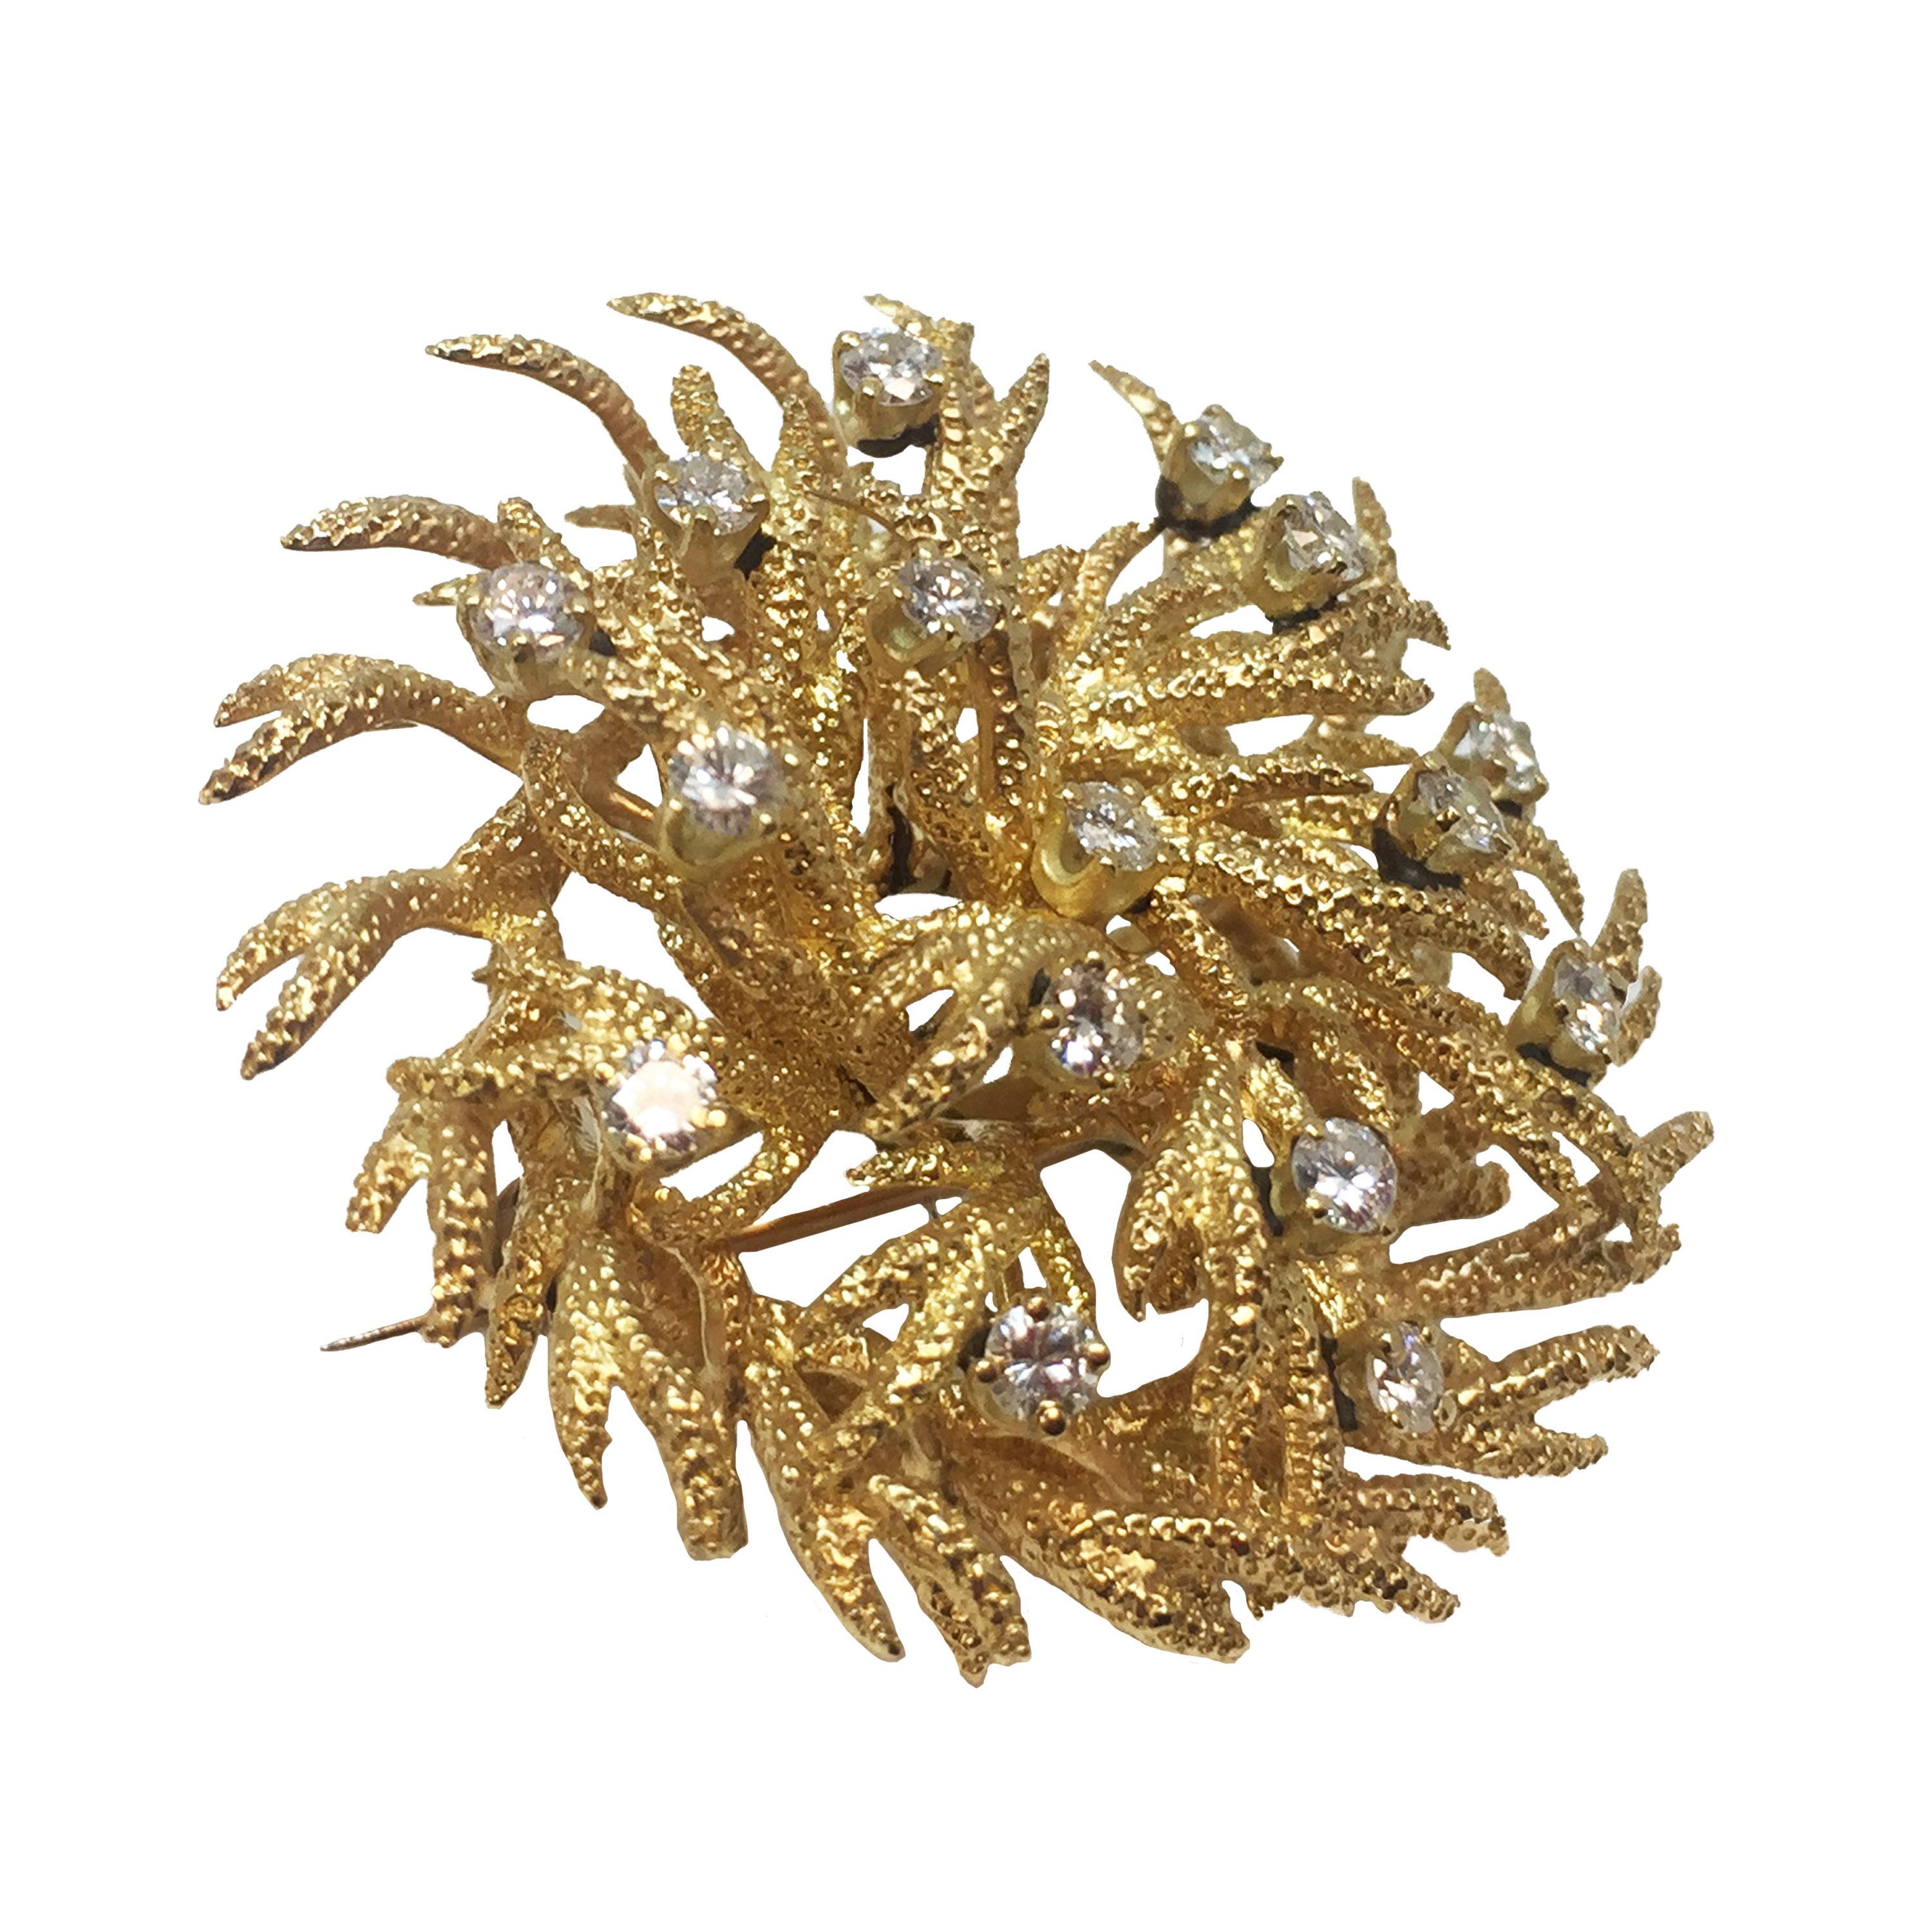 Circa 1970 Tiffany & Company 18K yellow Gold Brooch, all handmade, having a textured finish in the form of Branches. Set with Round Brilliant cut Diamonds that are F-G in color and VS in Clarity and total just under 1 Carat. The Brooch measures 1